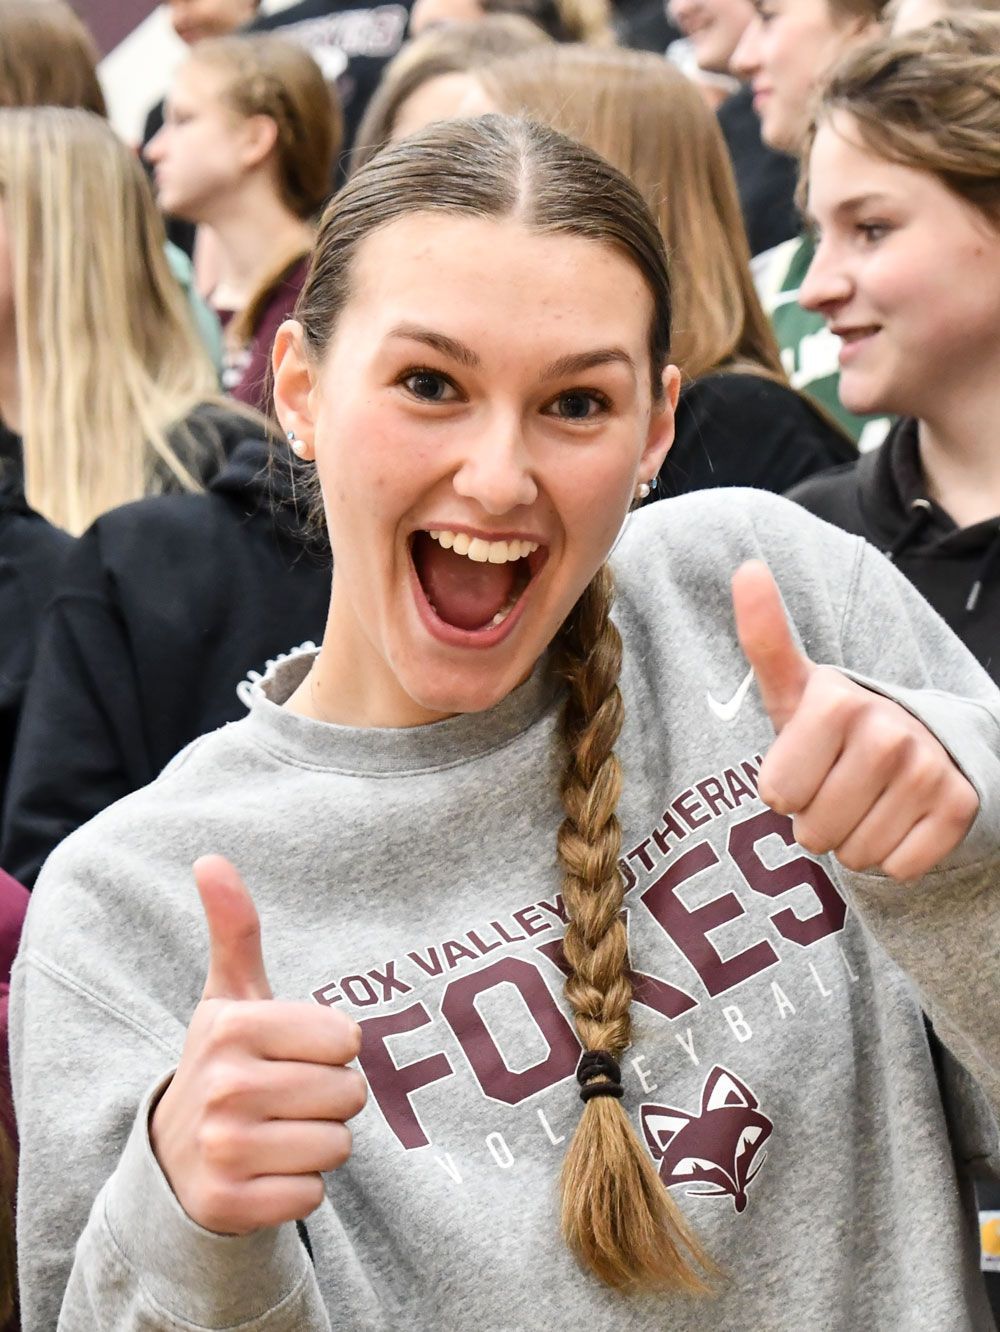 Enthusiastic female student with her thumbs up and wearing an FVL shirt